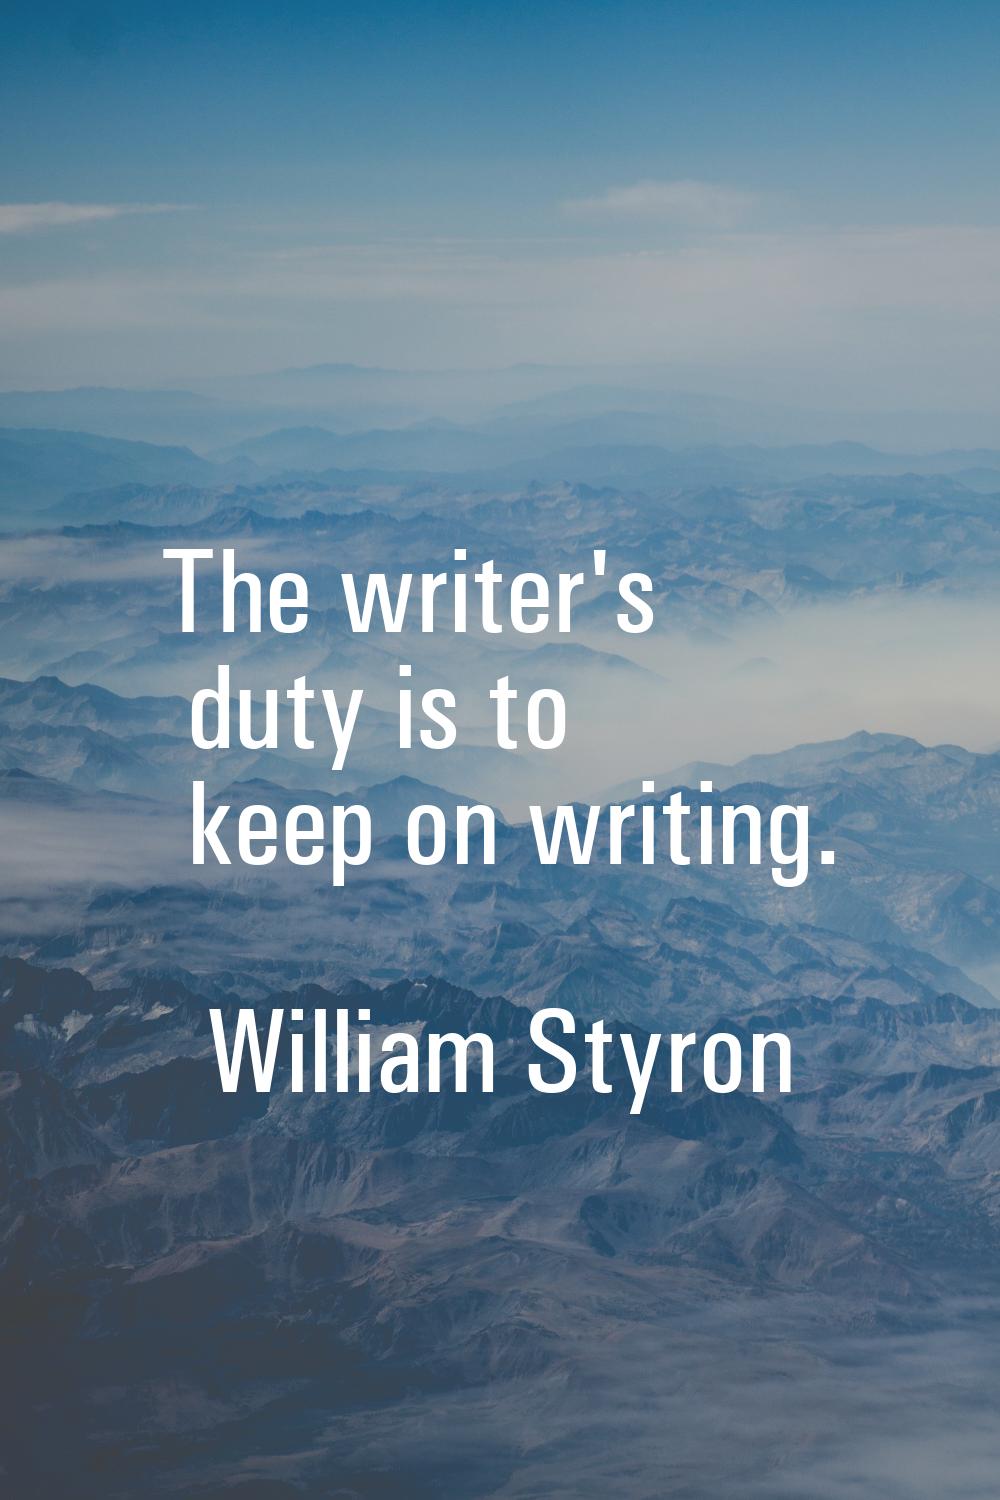 The writer's duty is to keep on writing.